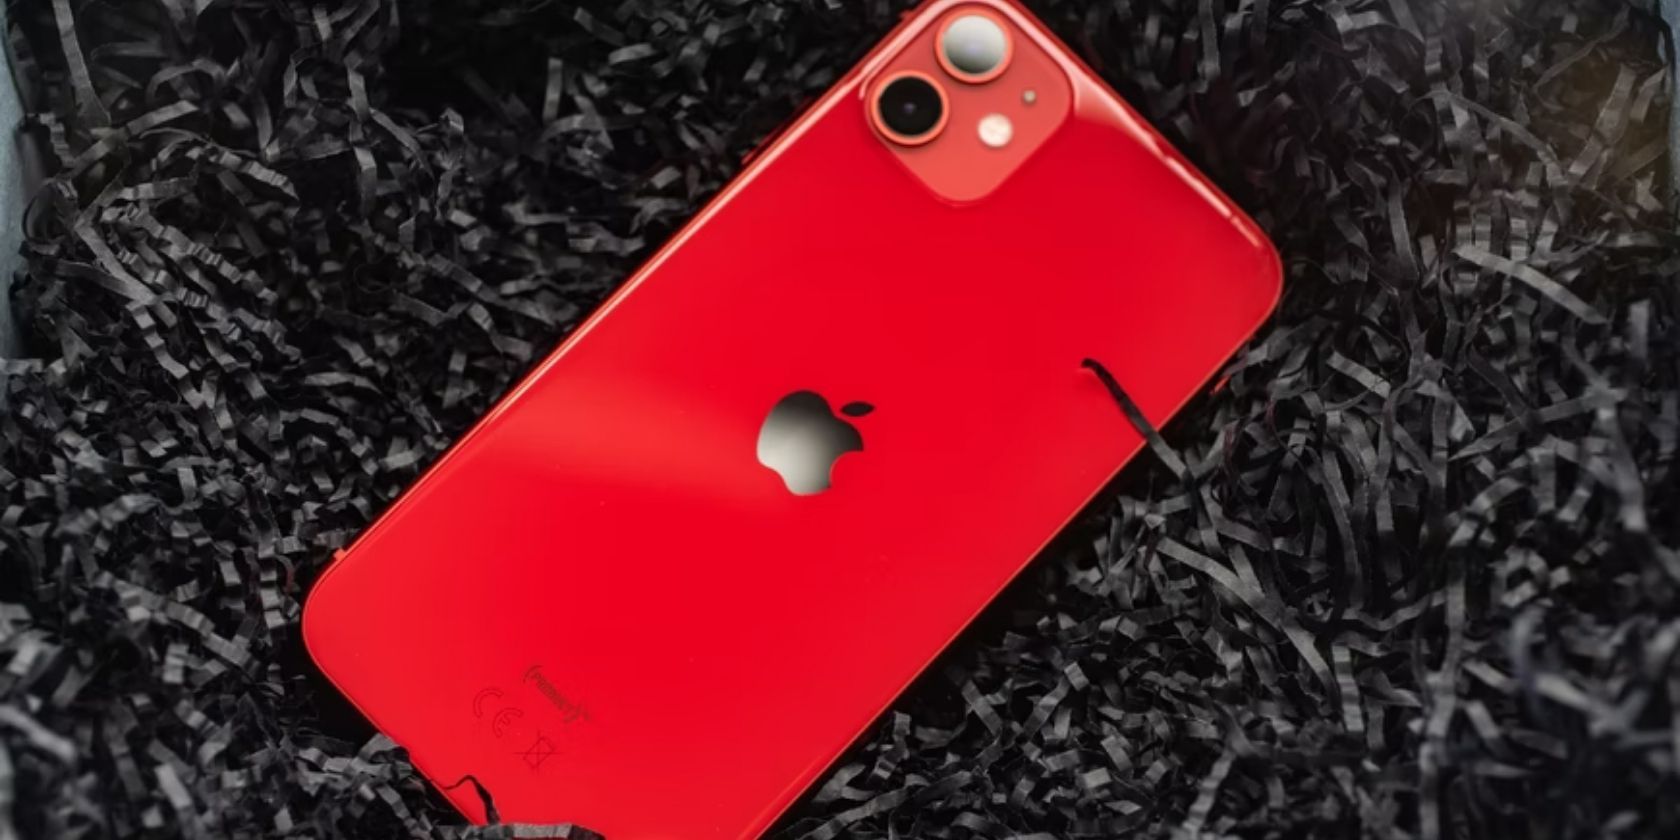 red iphone placed on black crinkle paper shreds